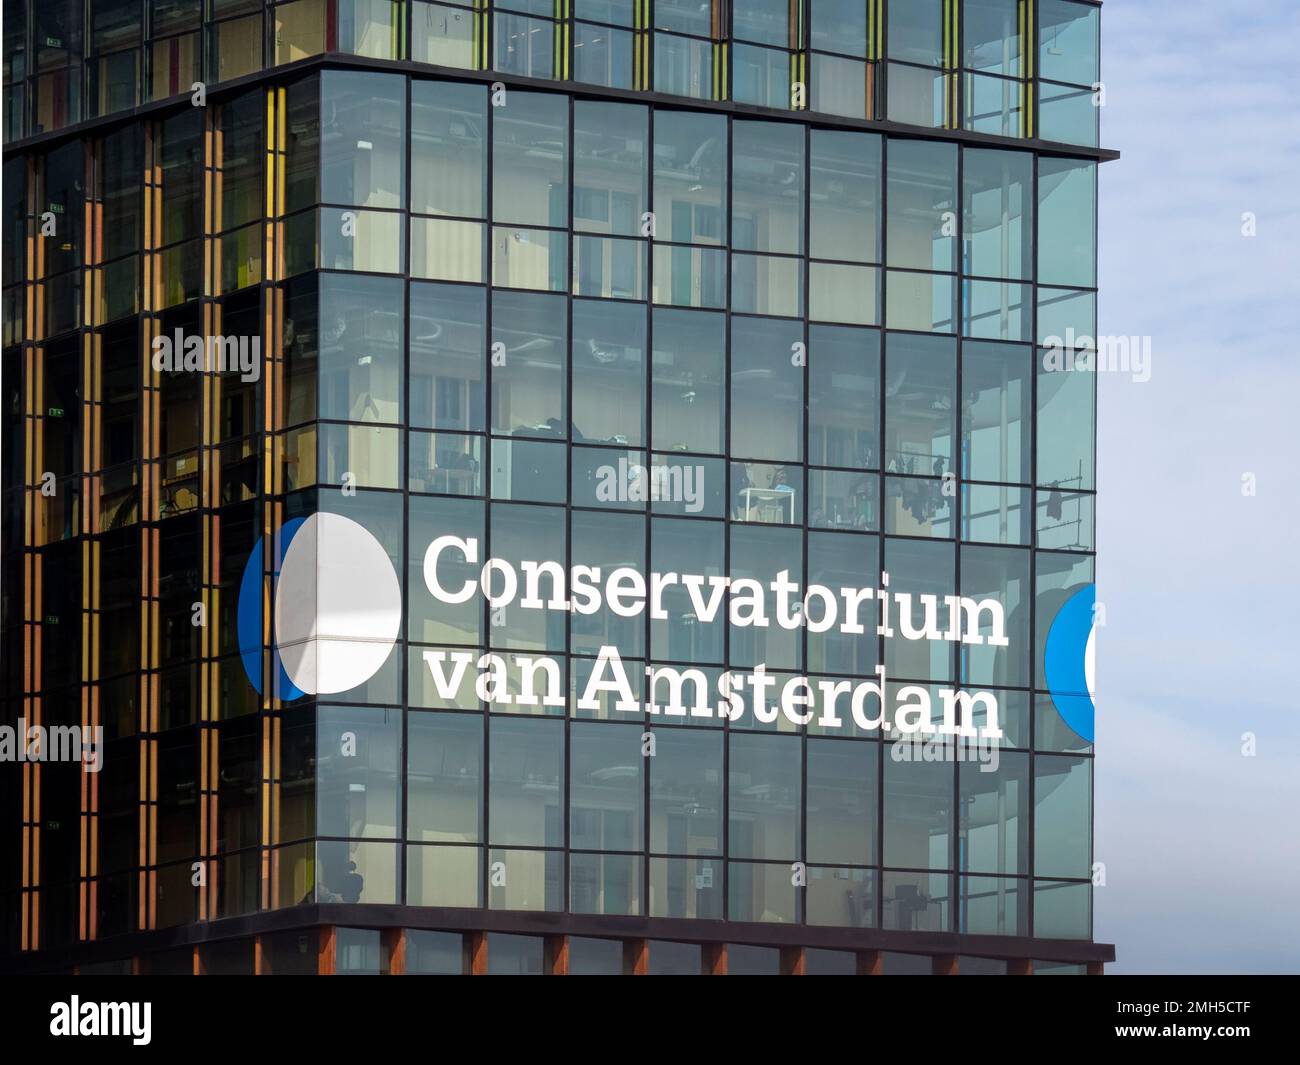 AMSTERDAM, NETHERLANDS - MAY 01, 2018:  Building and sign of the Conservatorium van Amsterdam (CvA) music conservatoire Stock Photo